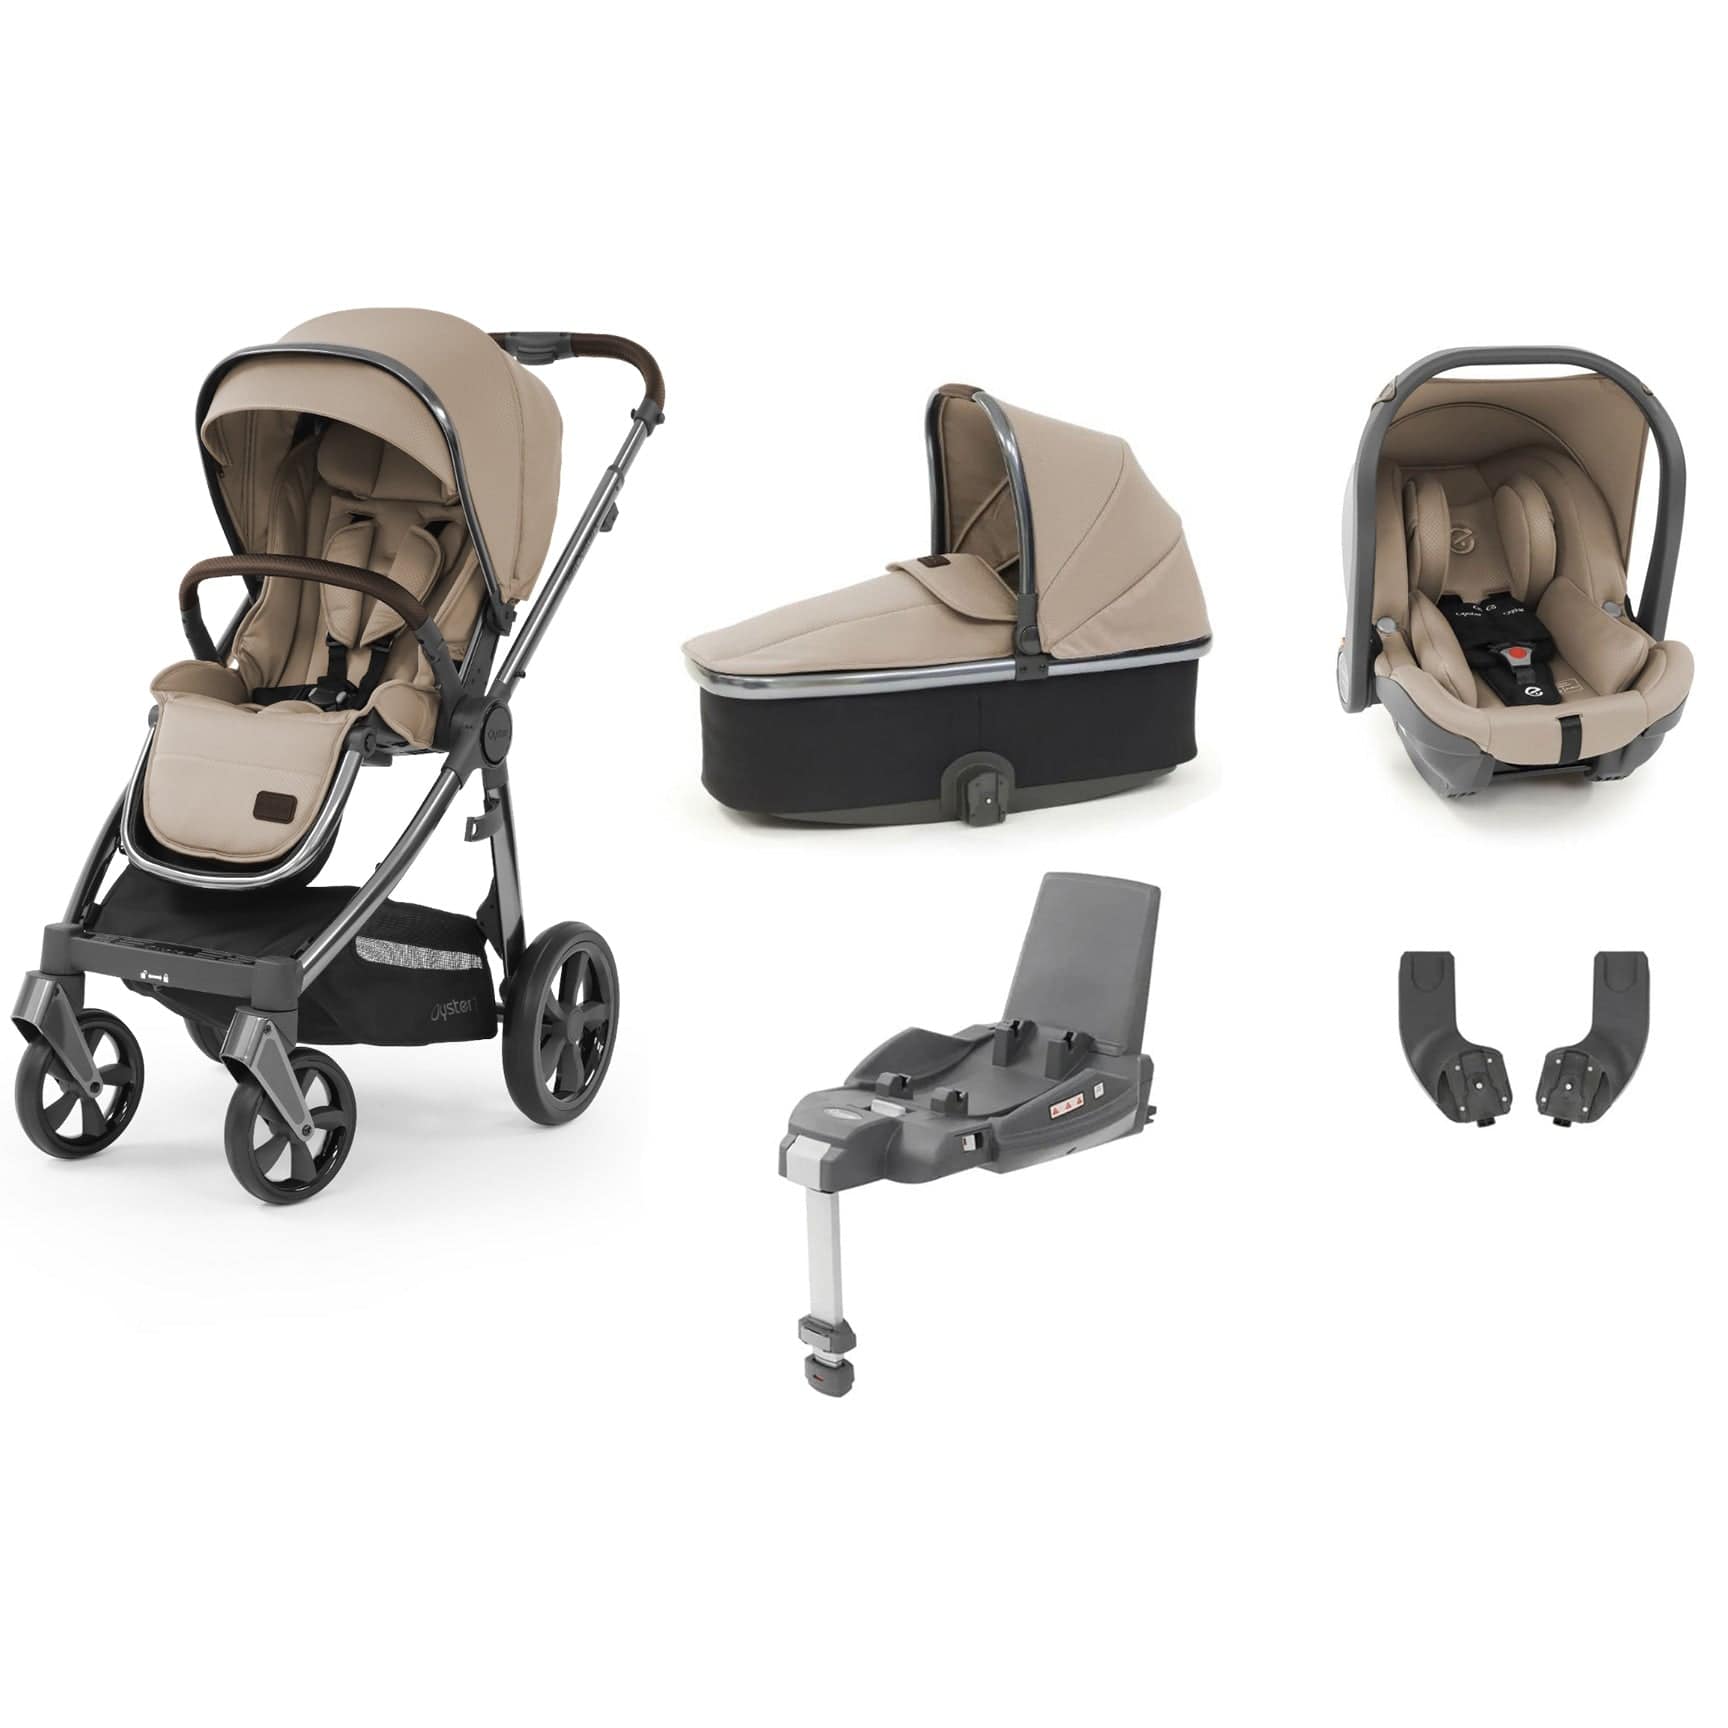 BabyStyle travel systems Babystyle Oyster 3 Essential Bundle with Car Seat - Butterscotch 9111-BTS